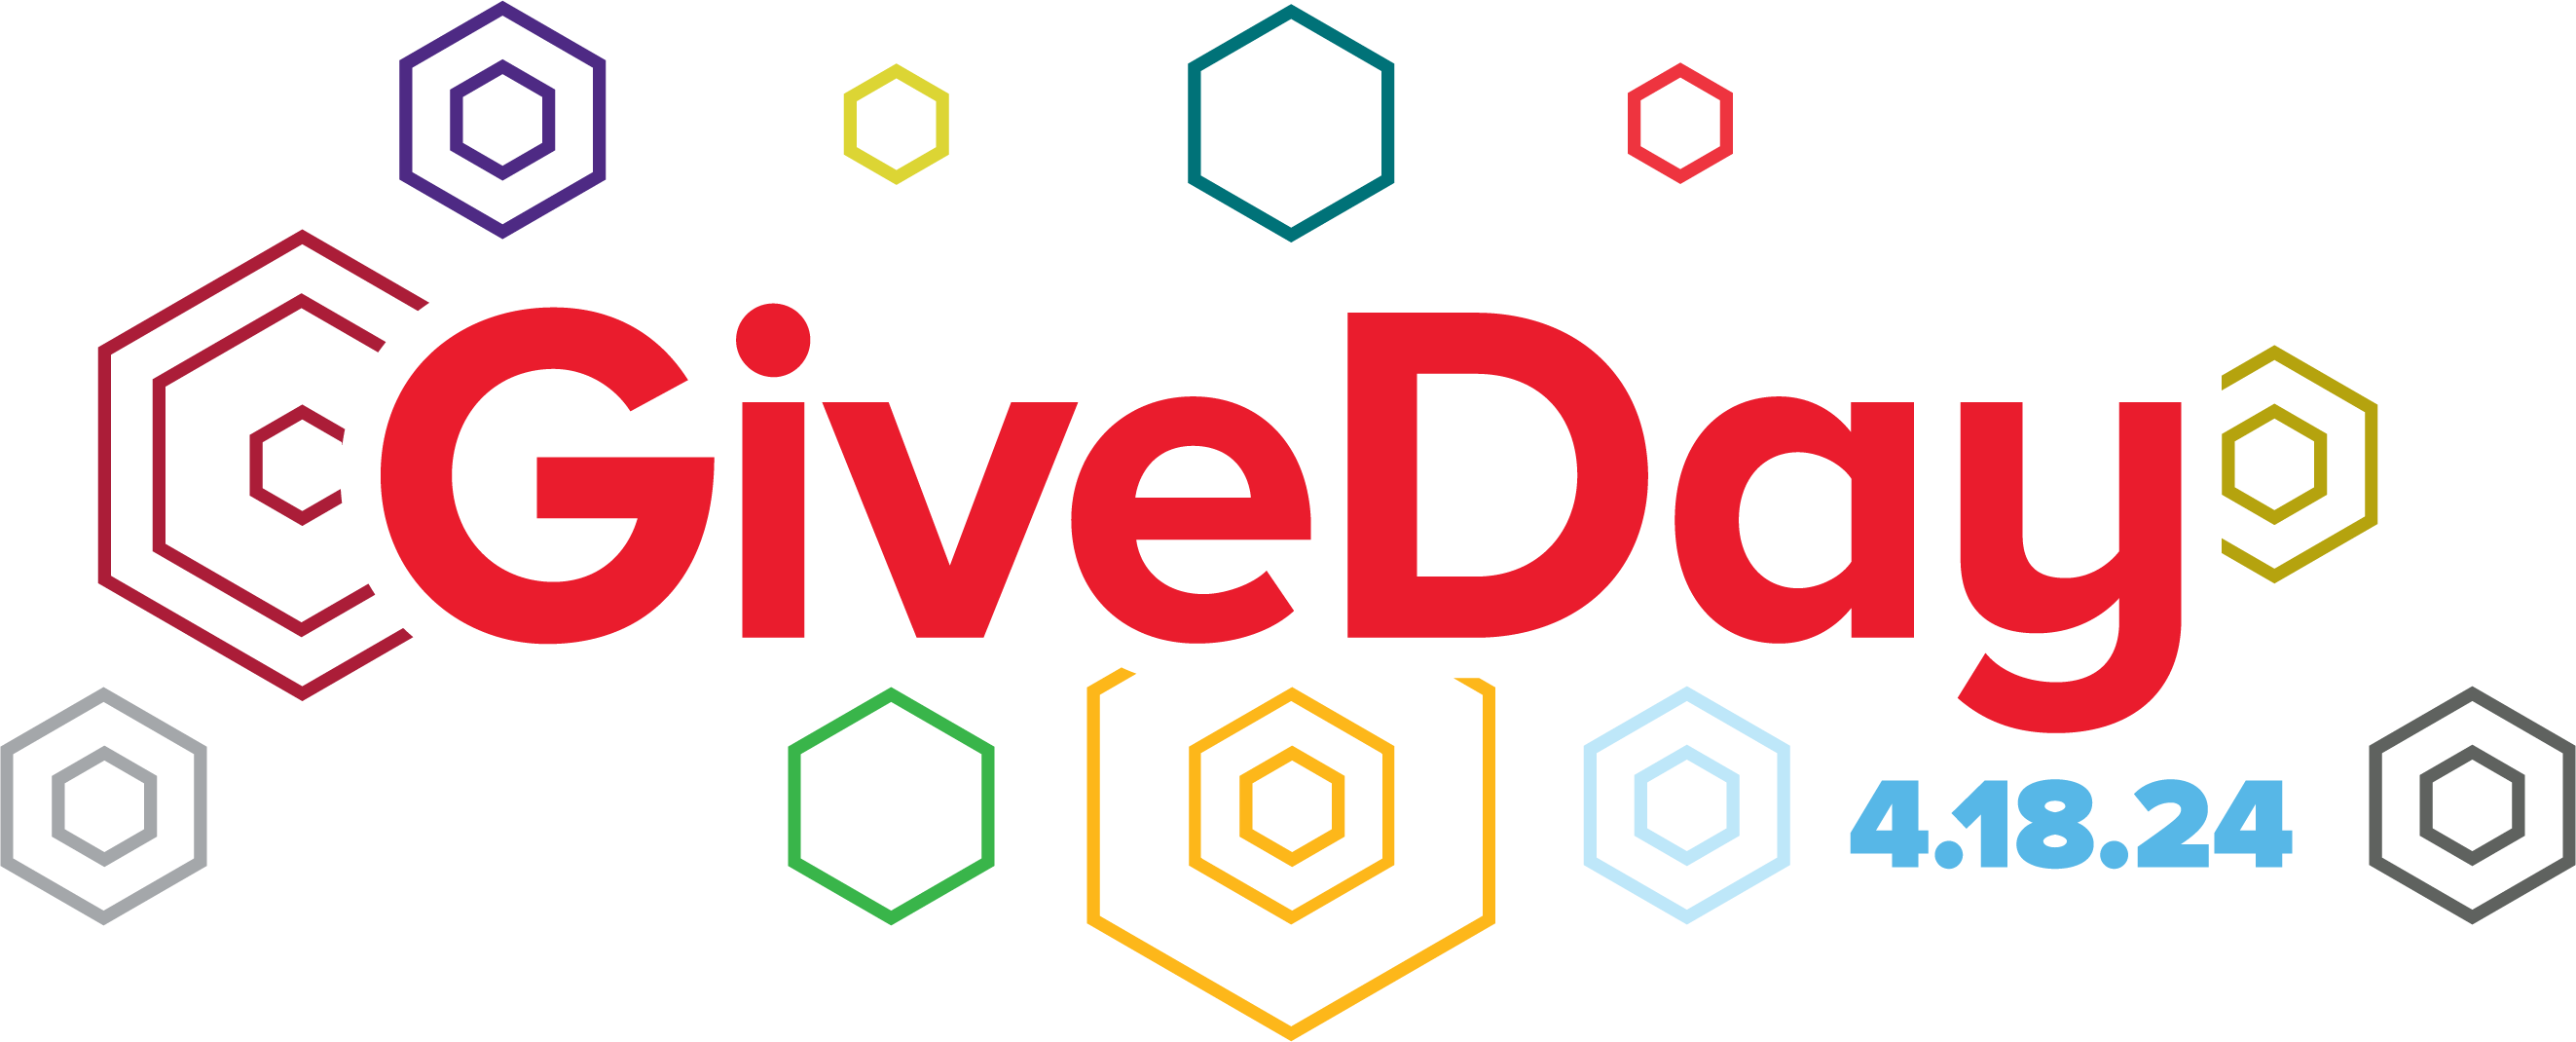 GiveDay Logo Colorful honeycomb patterns. 4.18.24